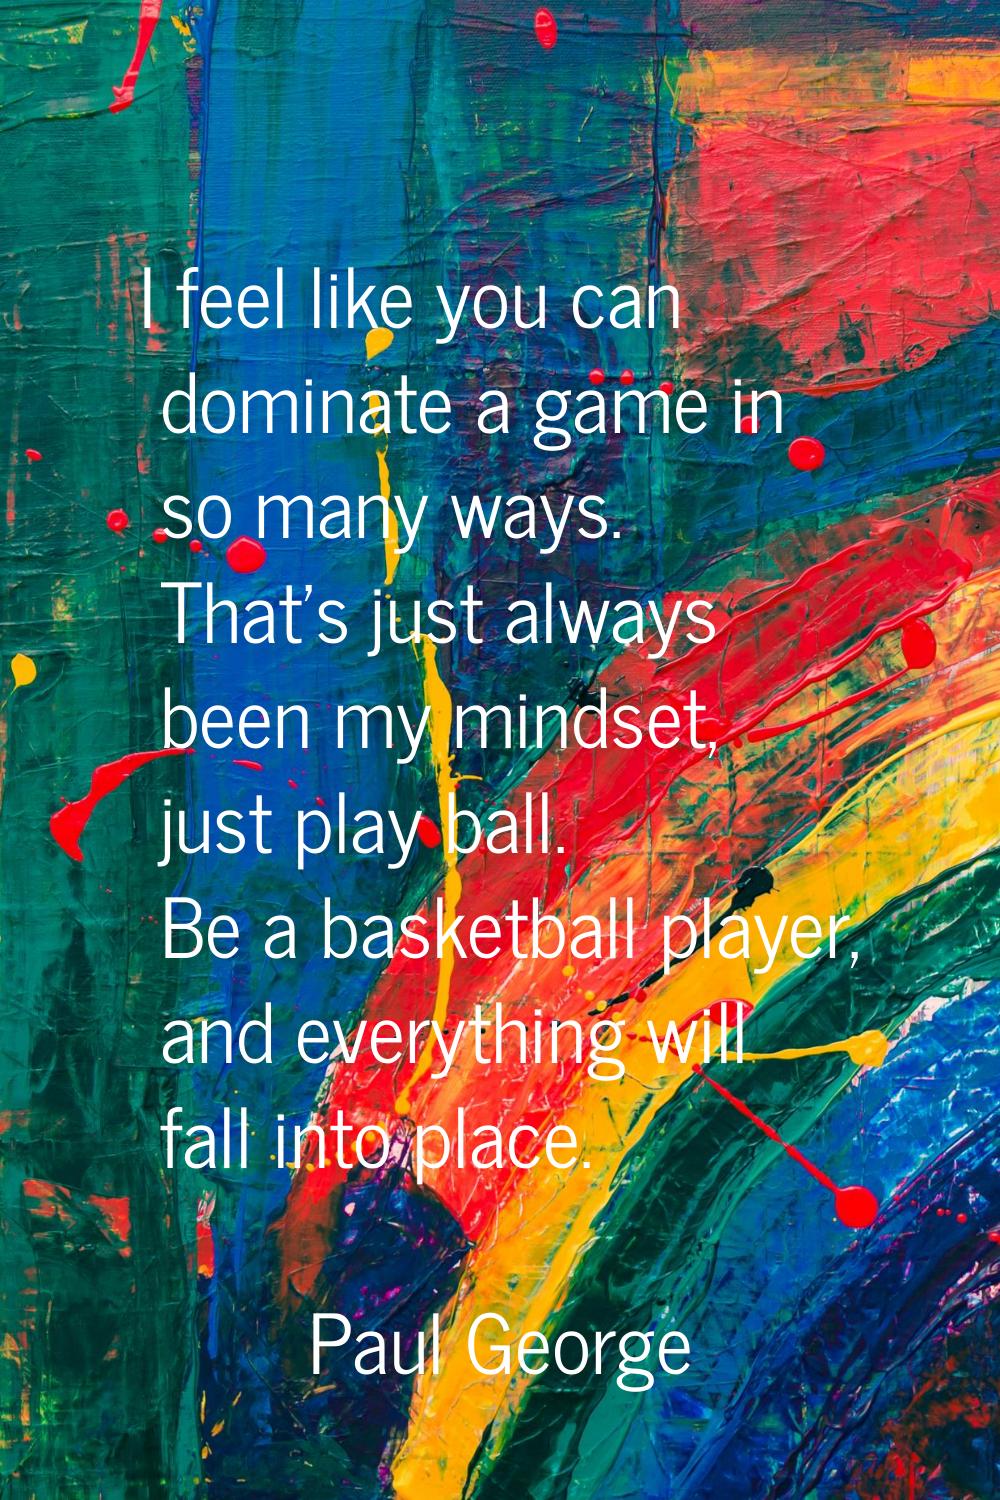 I feel like you can dominate a game in so many ways. That's just always been my mindset, just play 